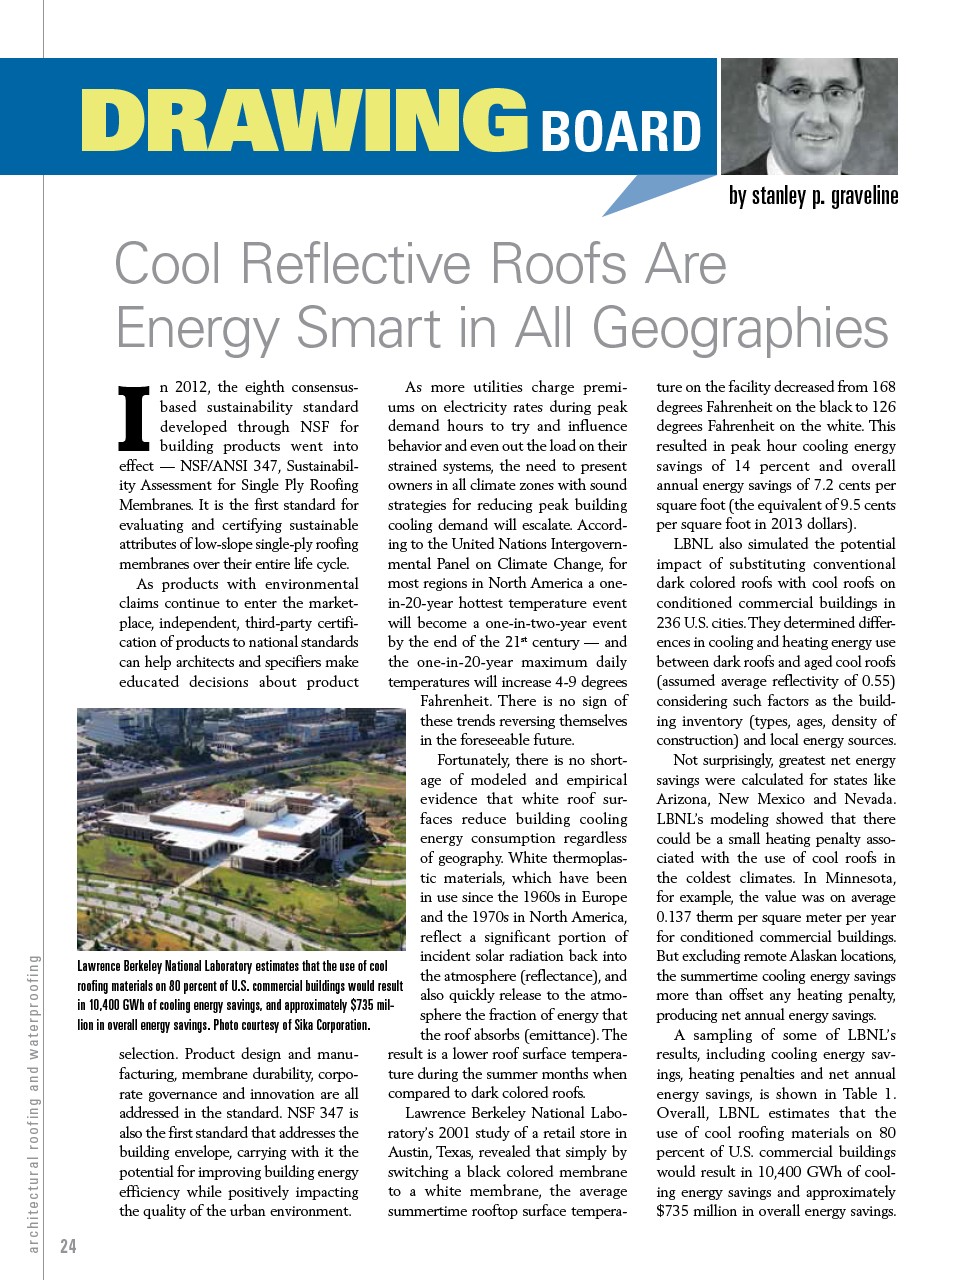 Cool Roofs are Energy Smart